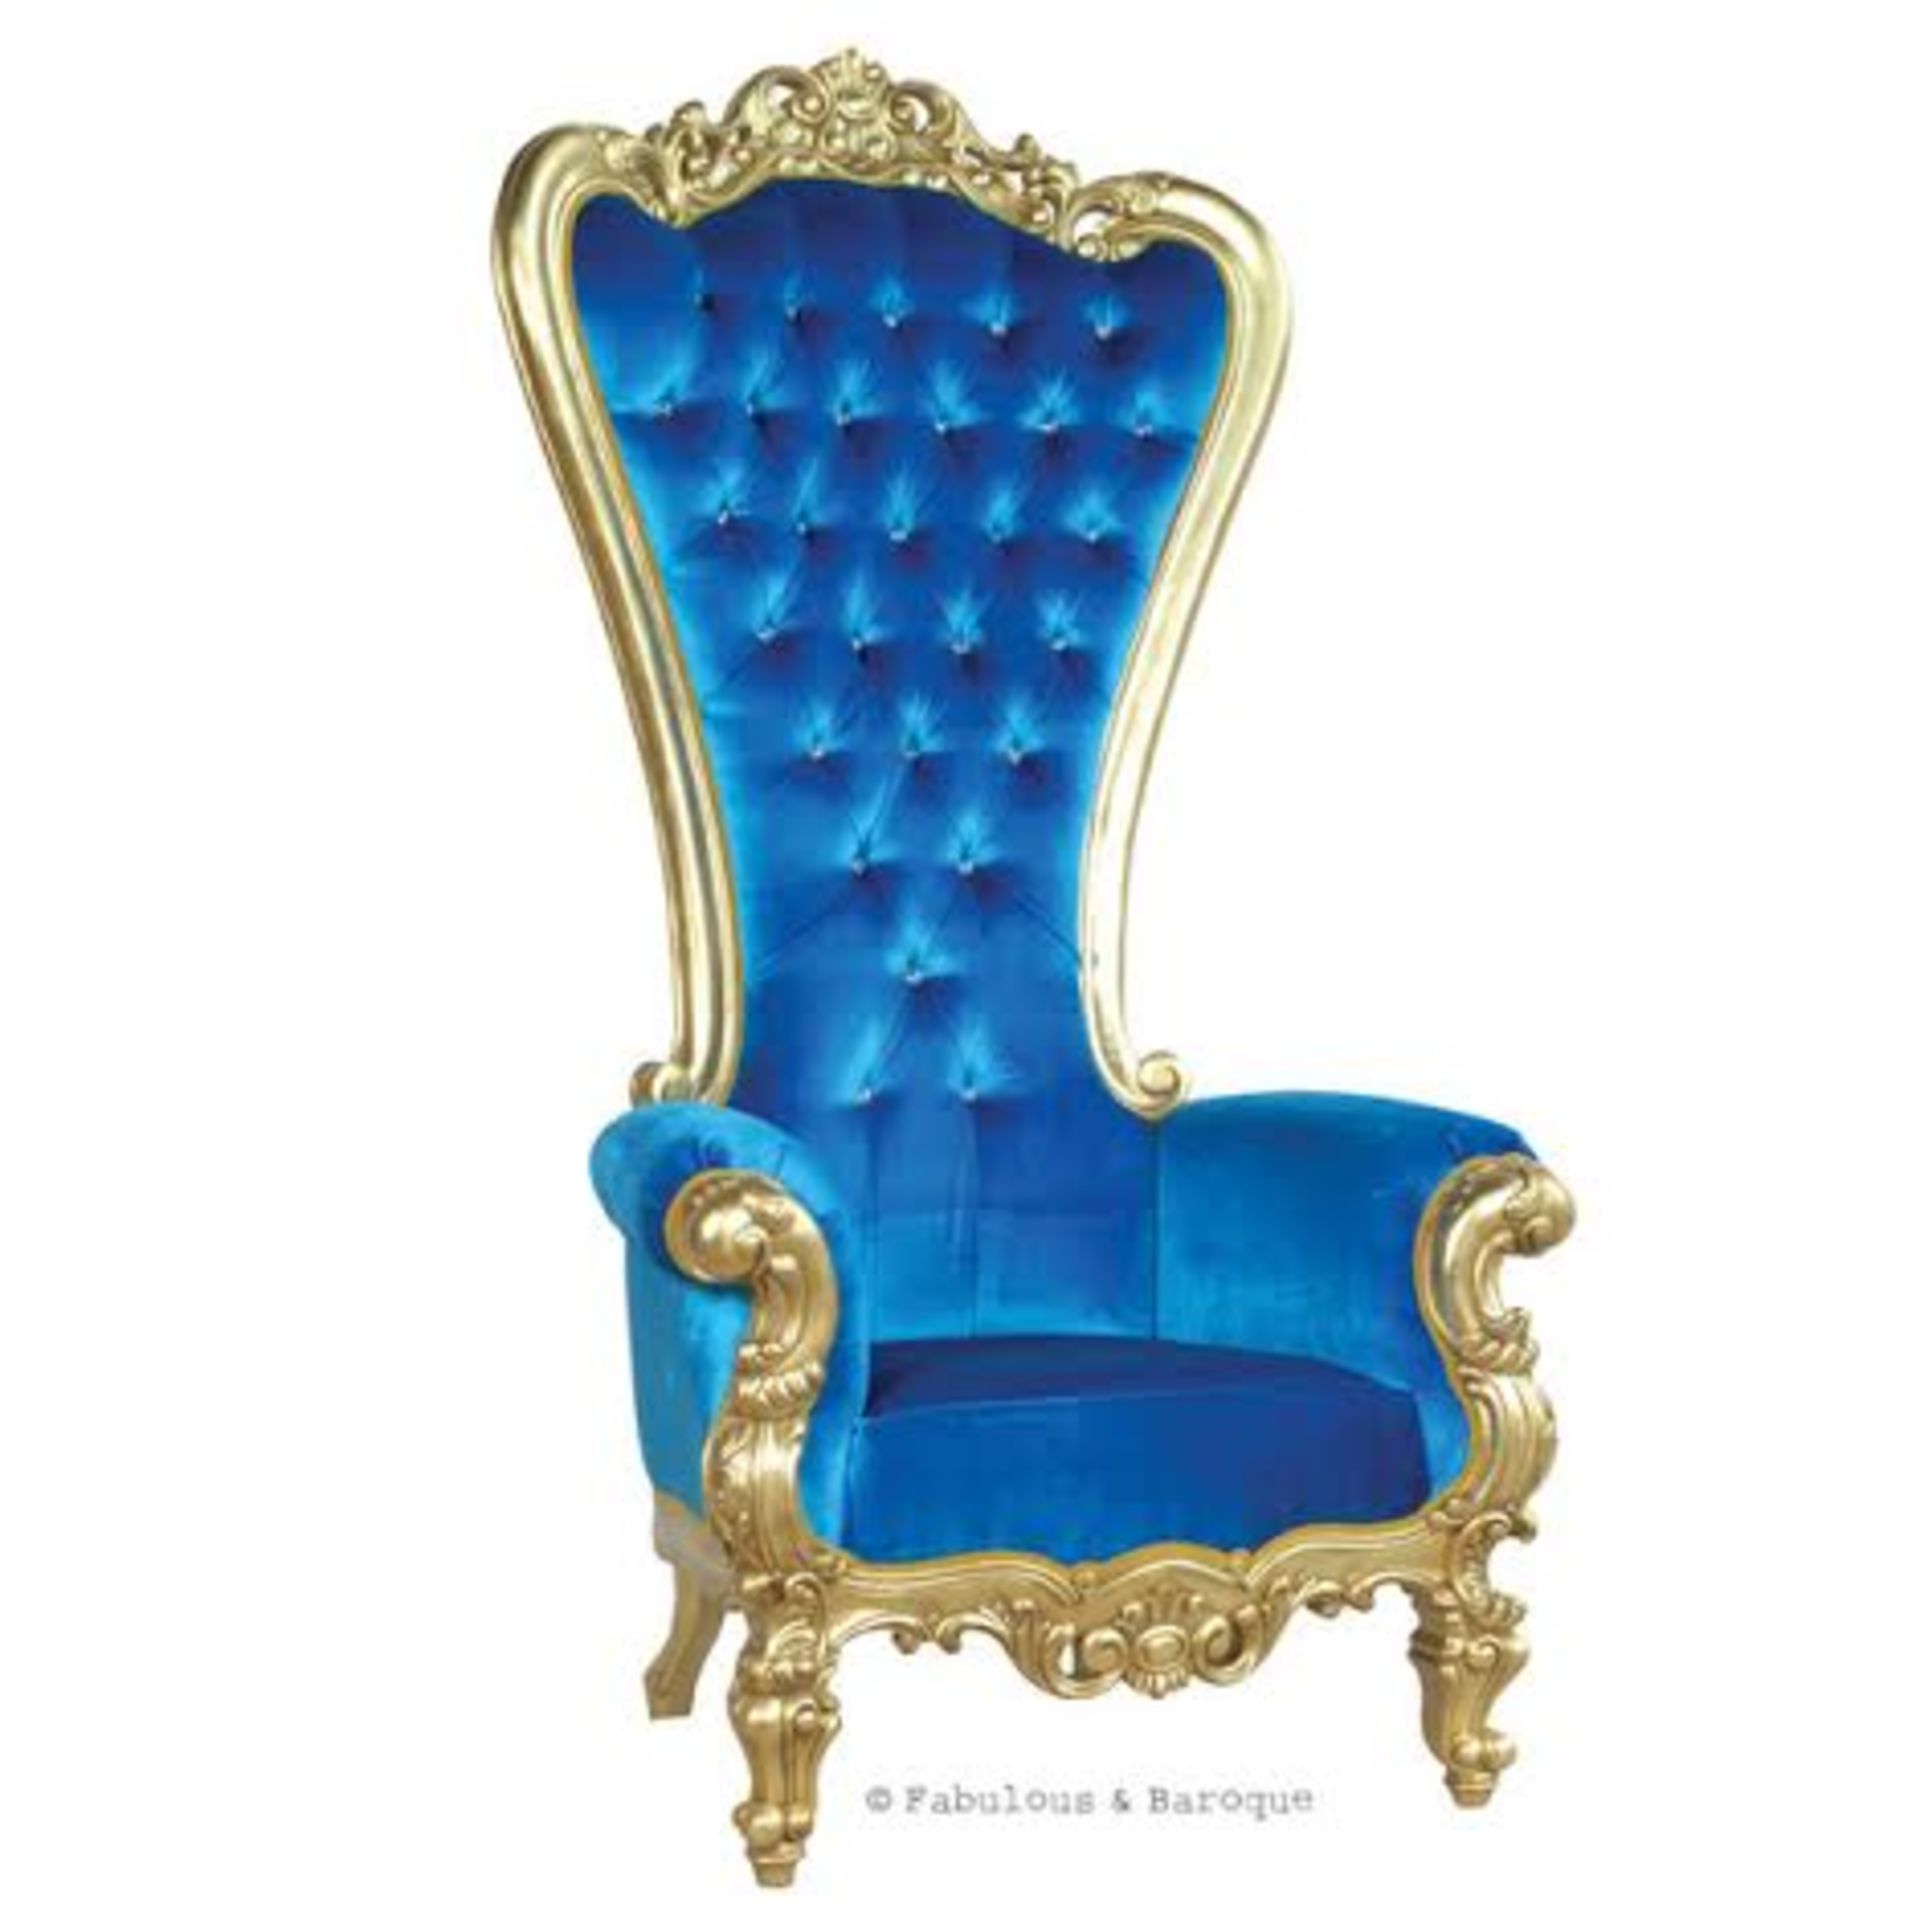 Absolom Roche Chair - Silver & Blue Plush Velvet The perfect talking point piece of furniture. Feast